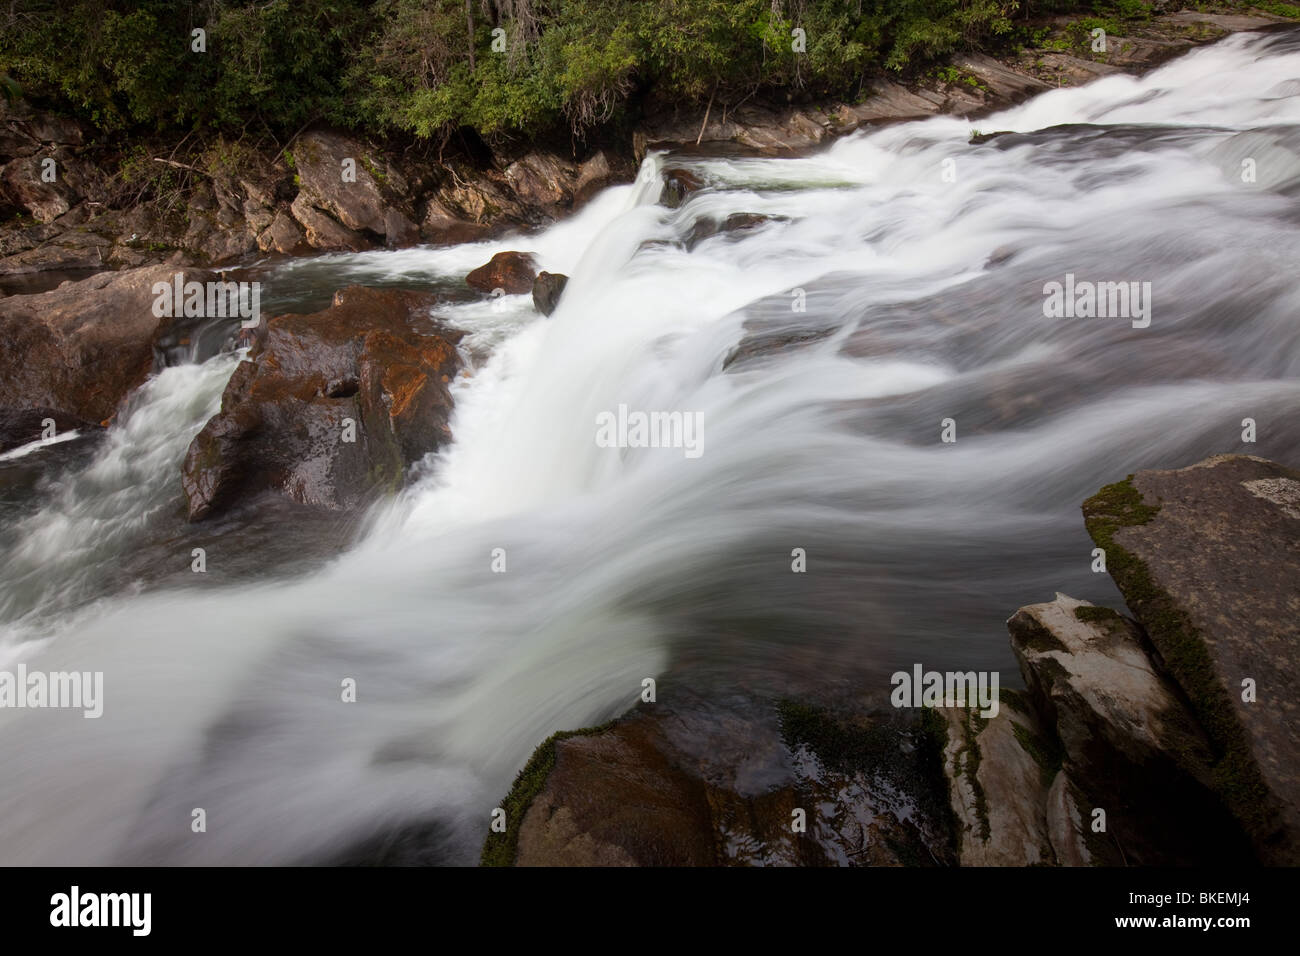 Big Bend fällt, Chattooga River, Chattooga Wild & Scenic River, Sumter National Forest, South Carolina Stockfoto